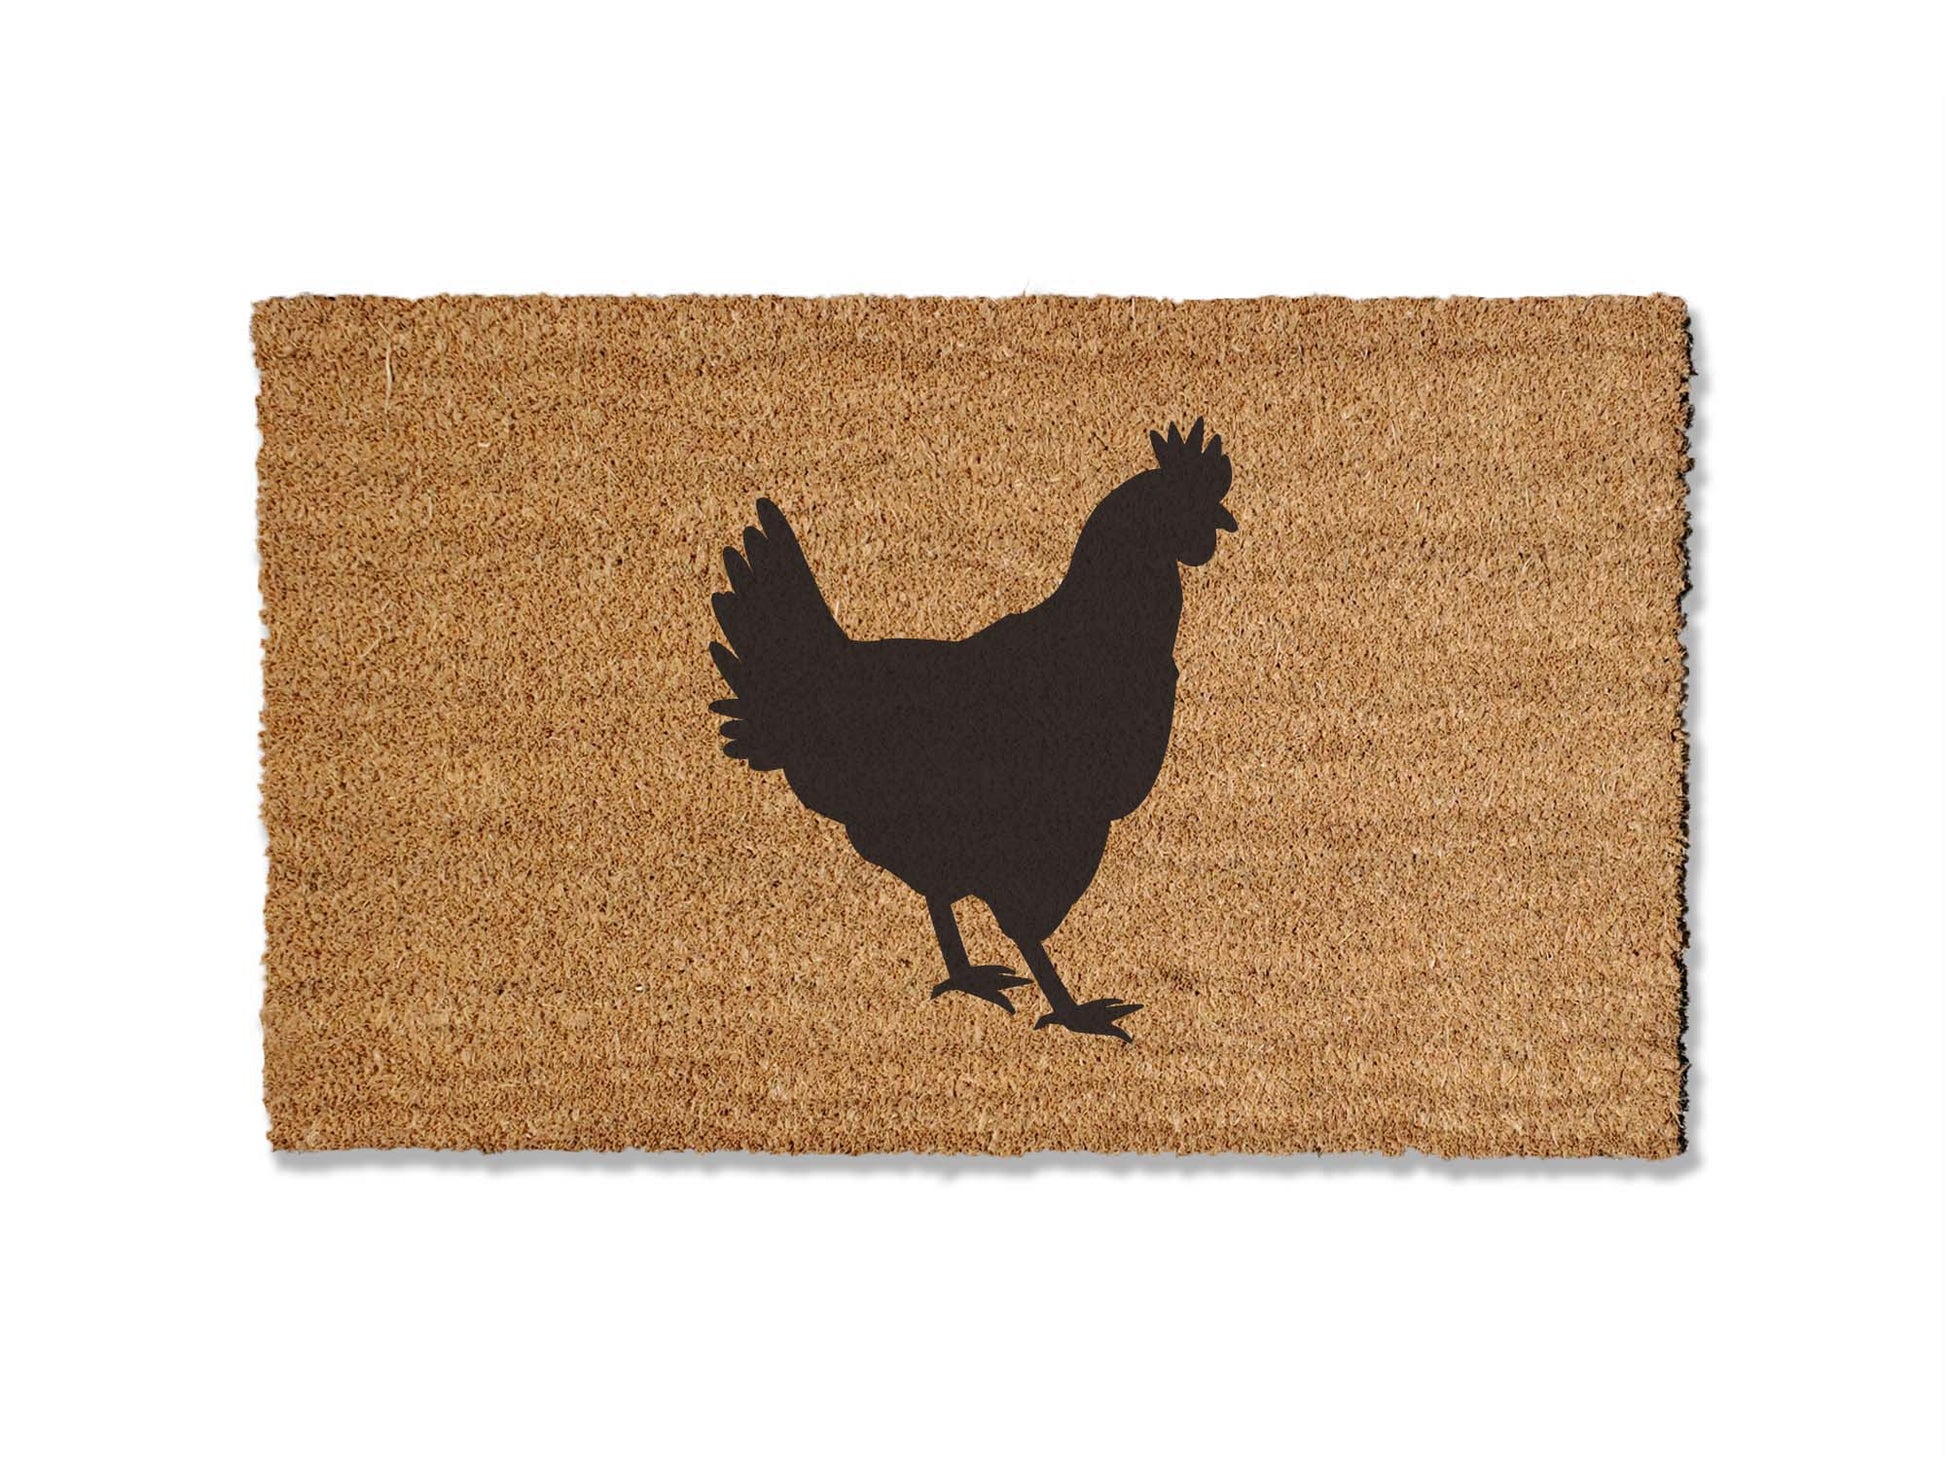 Add a touch of farmhouse charm to your doorstep with our coir doormat featuring an adorable chicken design. Ideal for chicken owners or farmhouse enthusiasts, this durable mat, designed to stop dirt in its tracks, is a delightful and practical addition to your entryway.